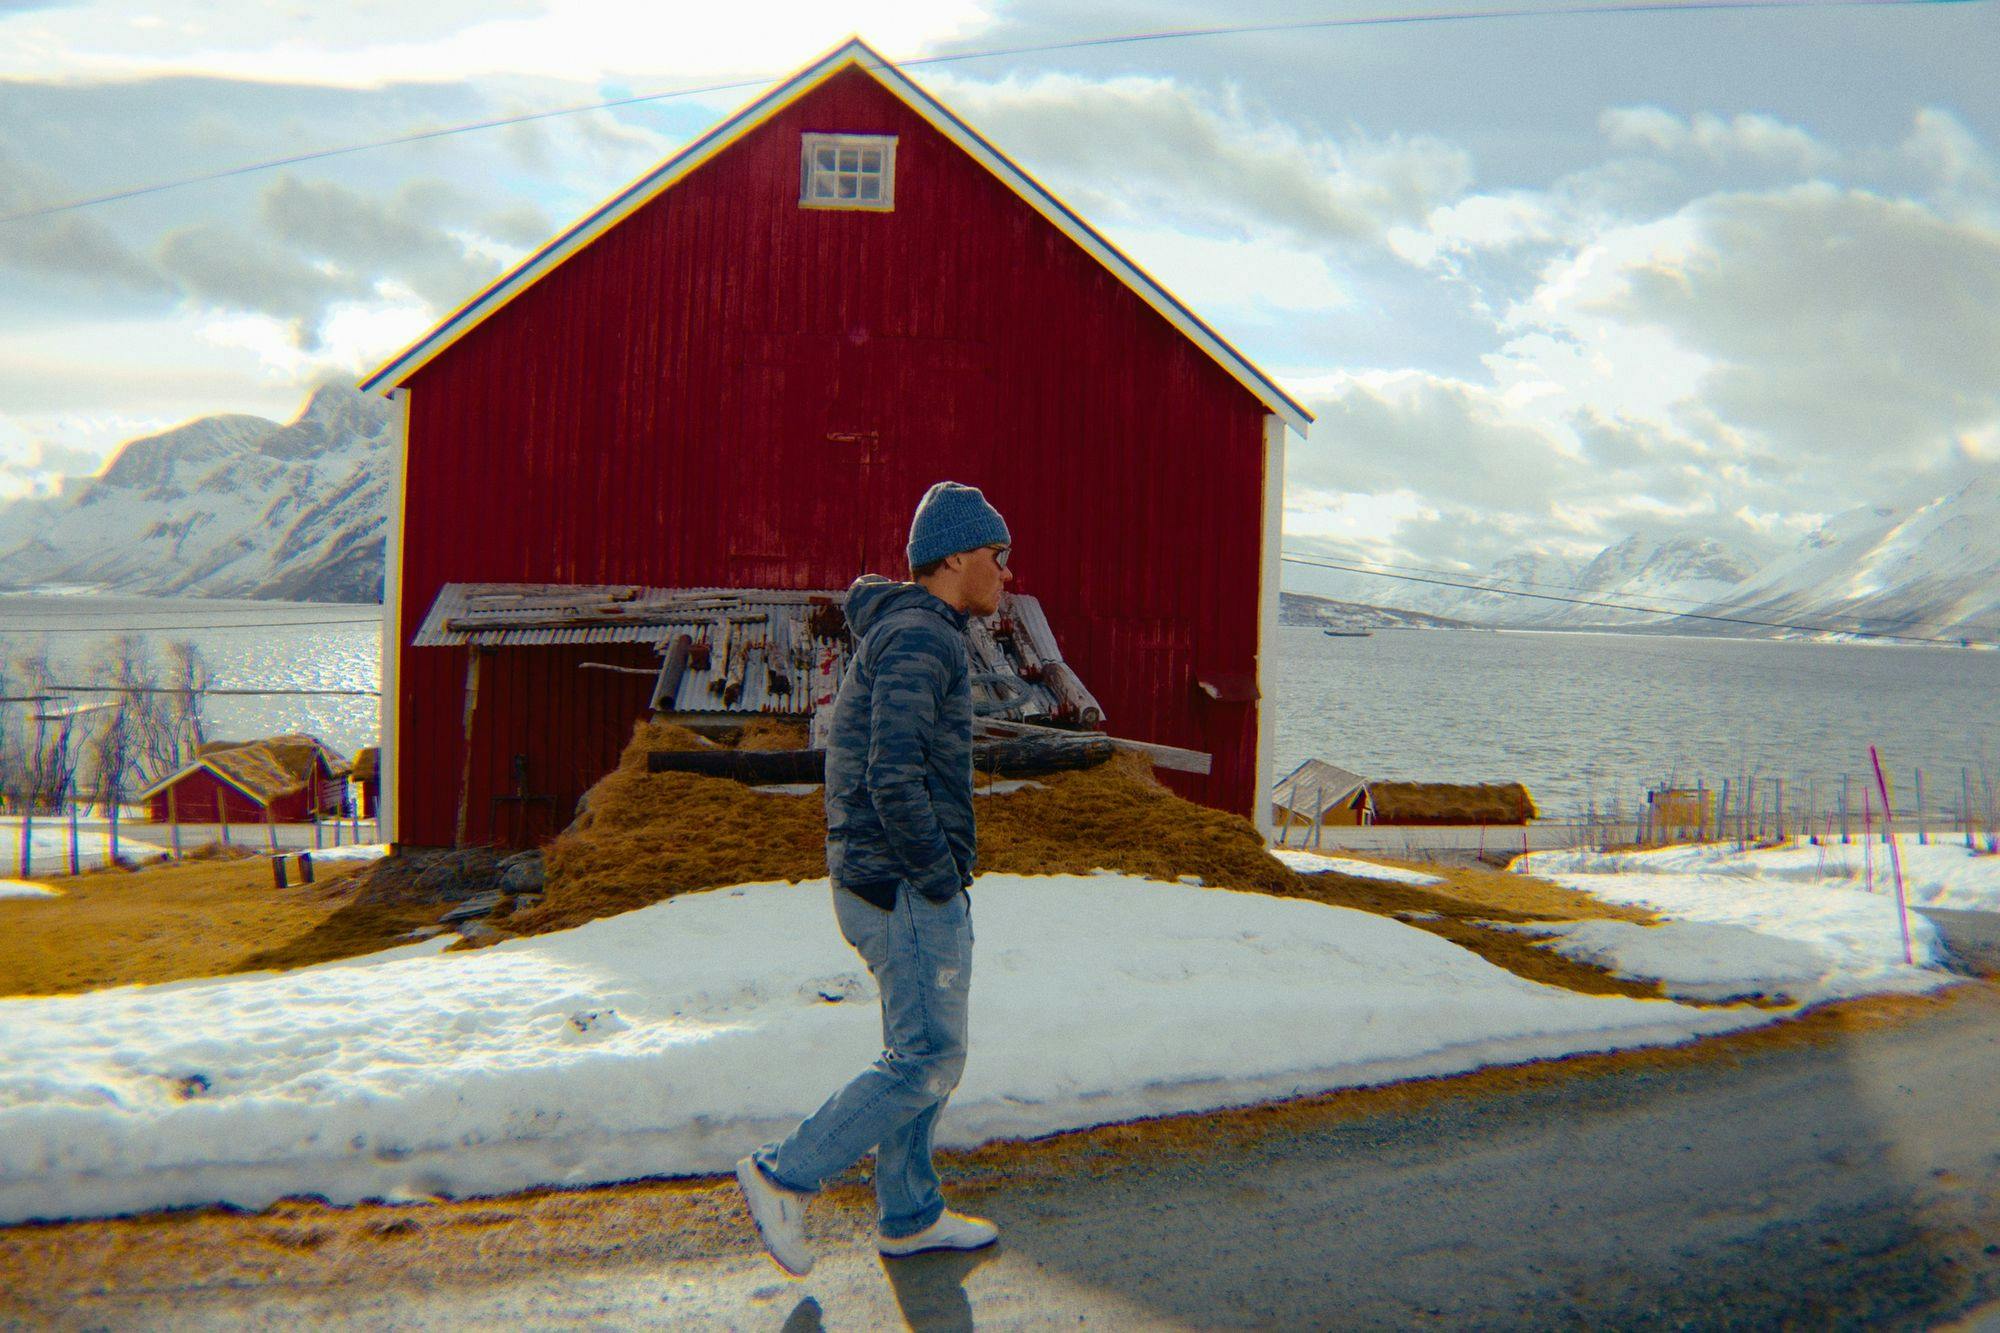 A man walking in front of a traditional red Norweigan farmhouse